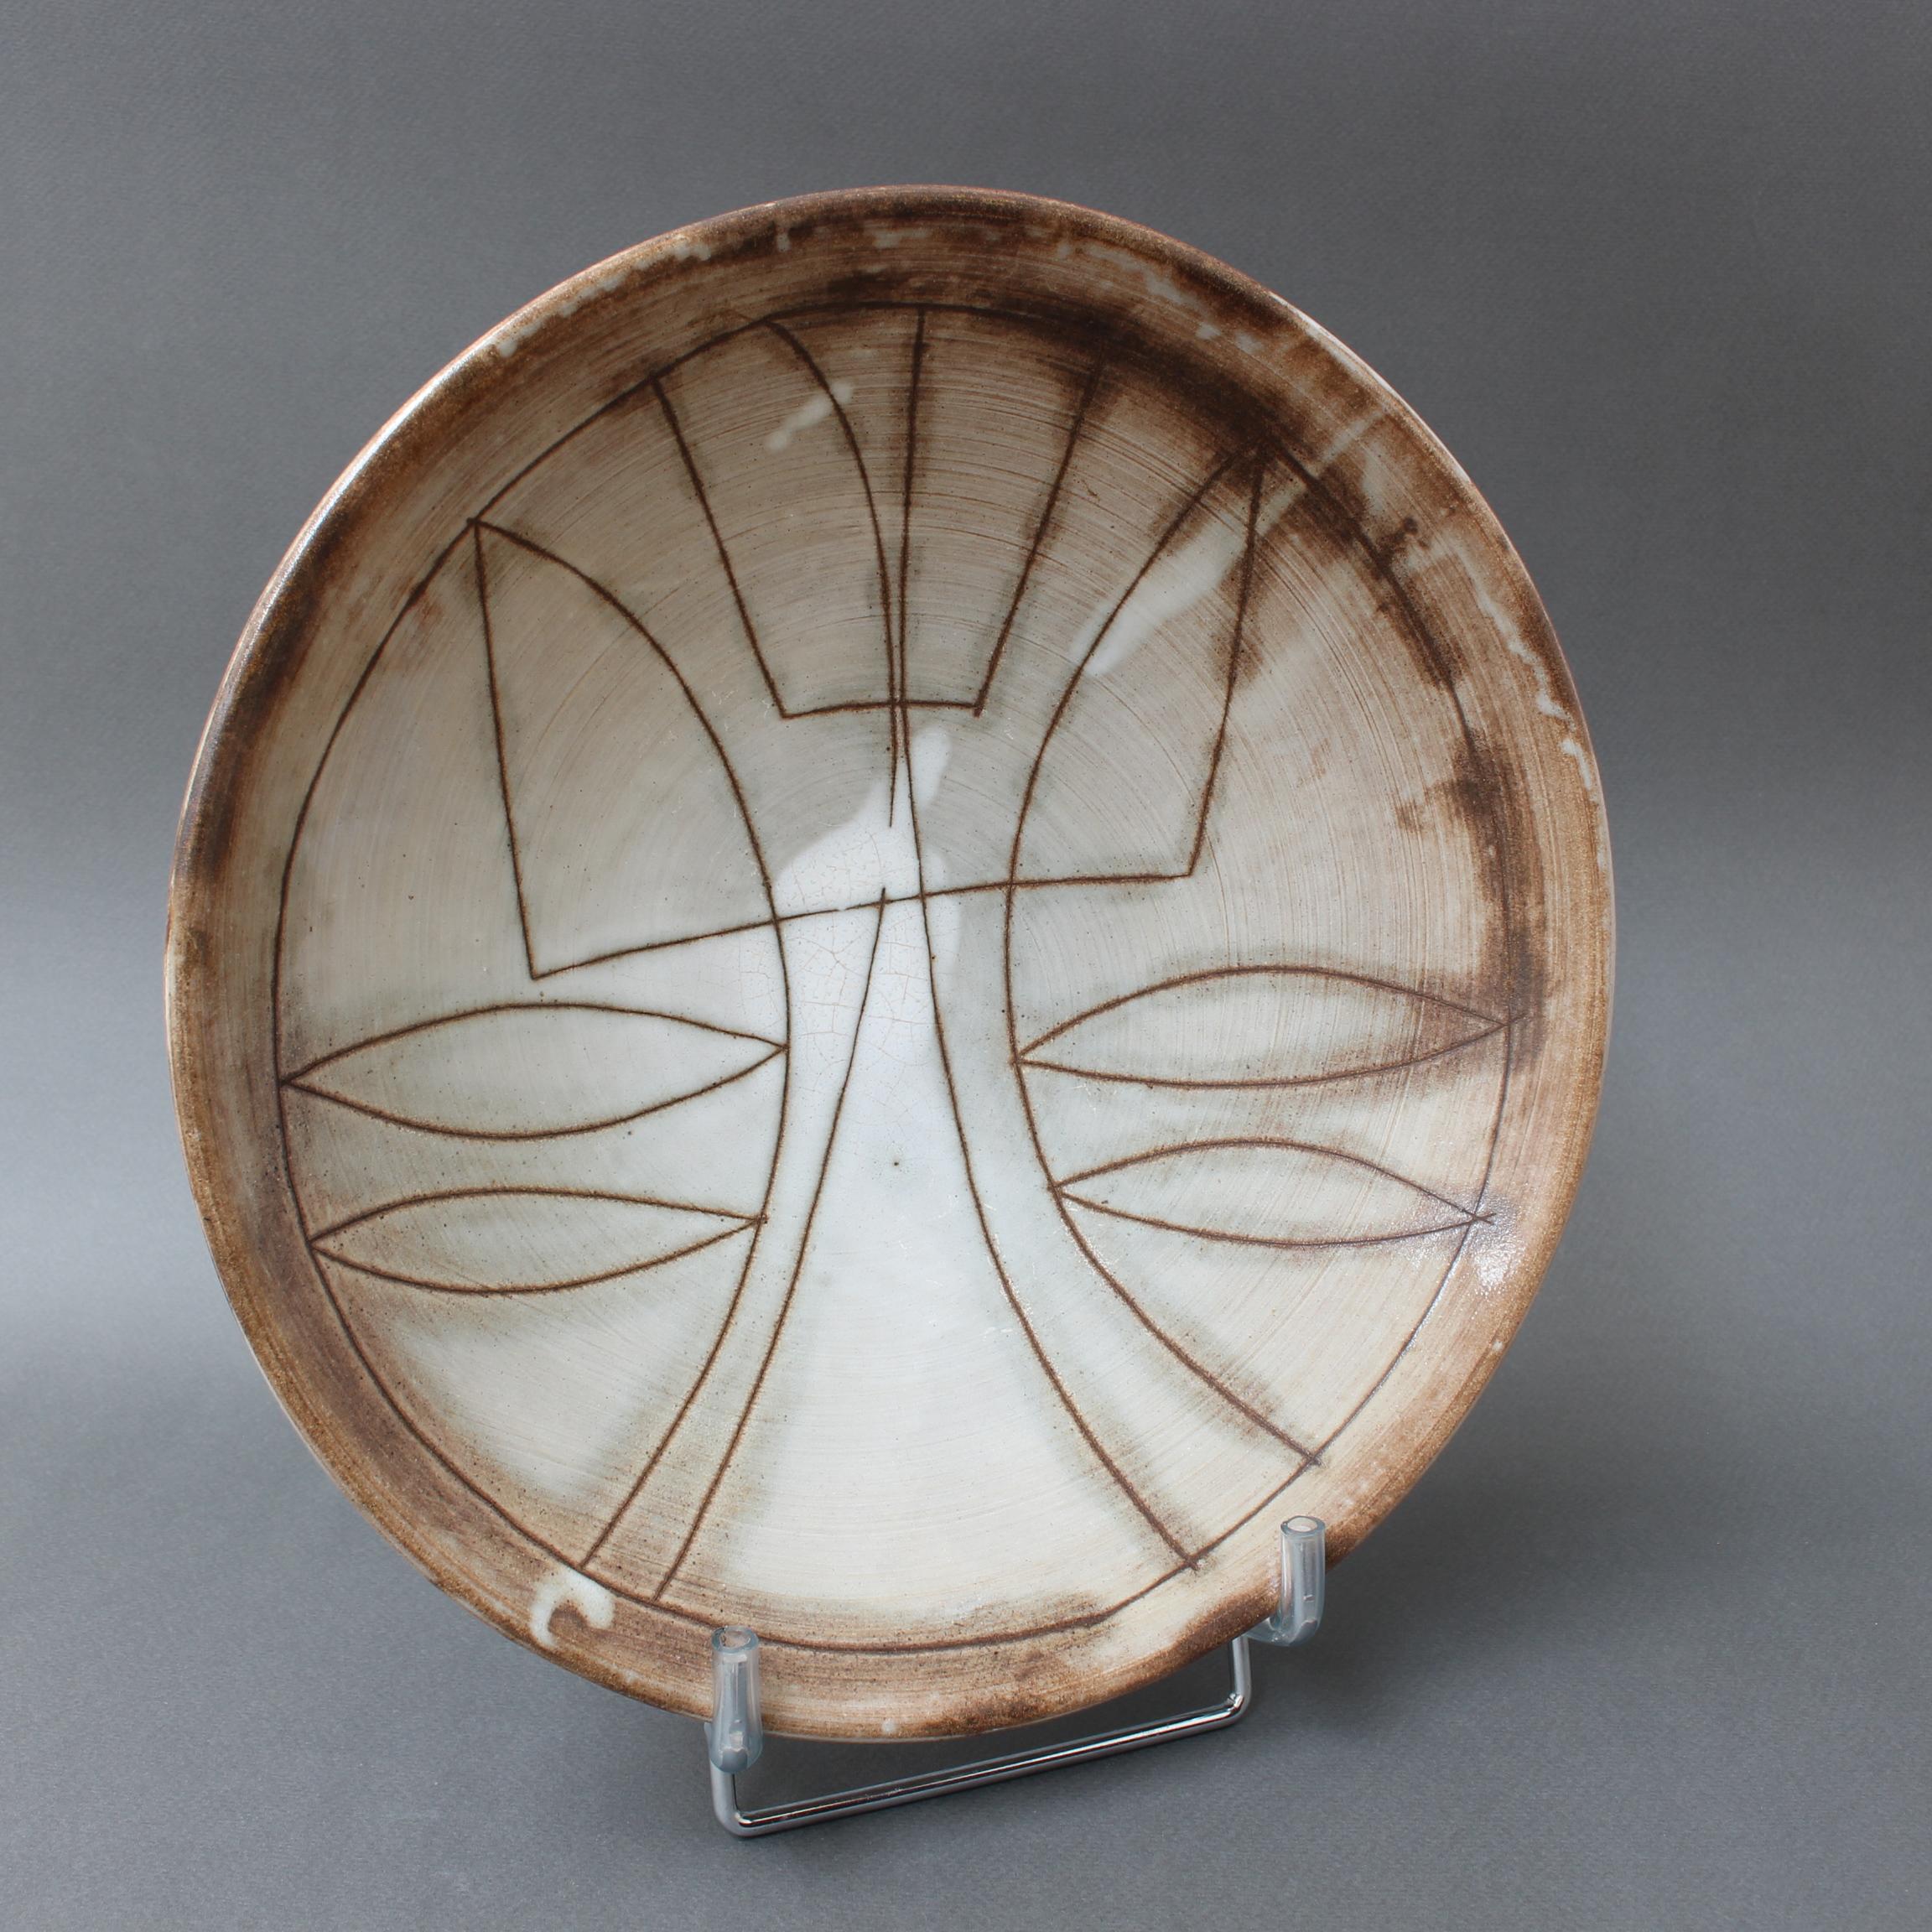 Mid-century decorative bowl (circa 1960s) by Jacques Pouchain - Atelier Dieulefit. This elegant bowl, elevated by a small circular base, was created in Pouchain's trademark tones and glaze. The bowl's recess is decorated with a stylised flower in